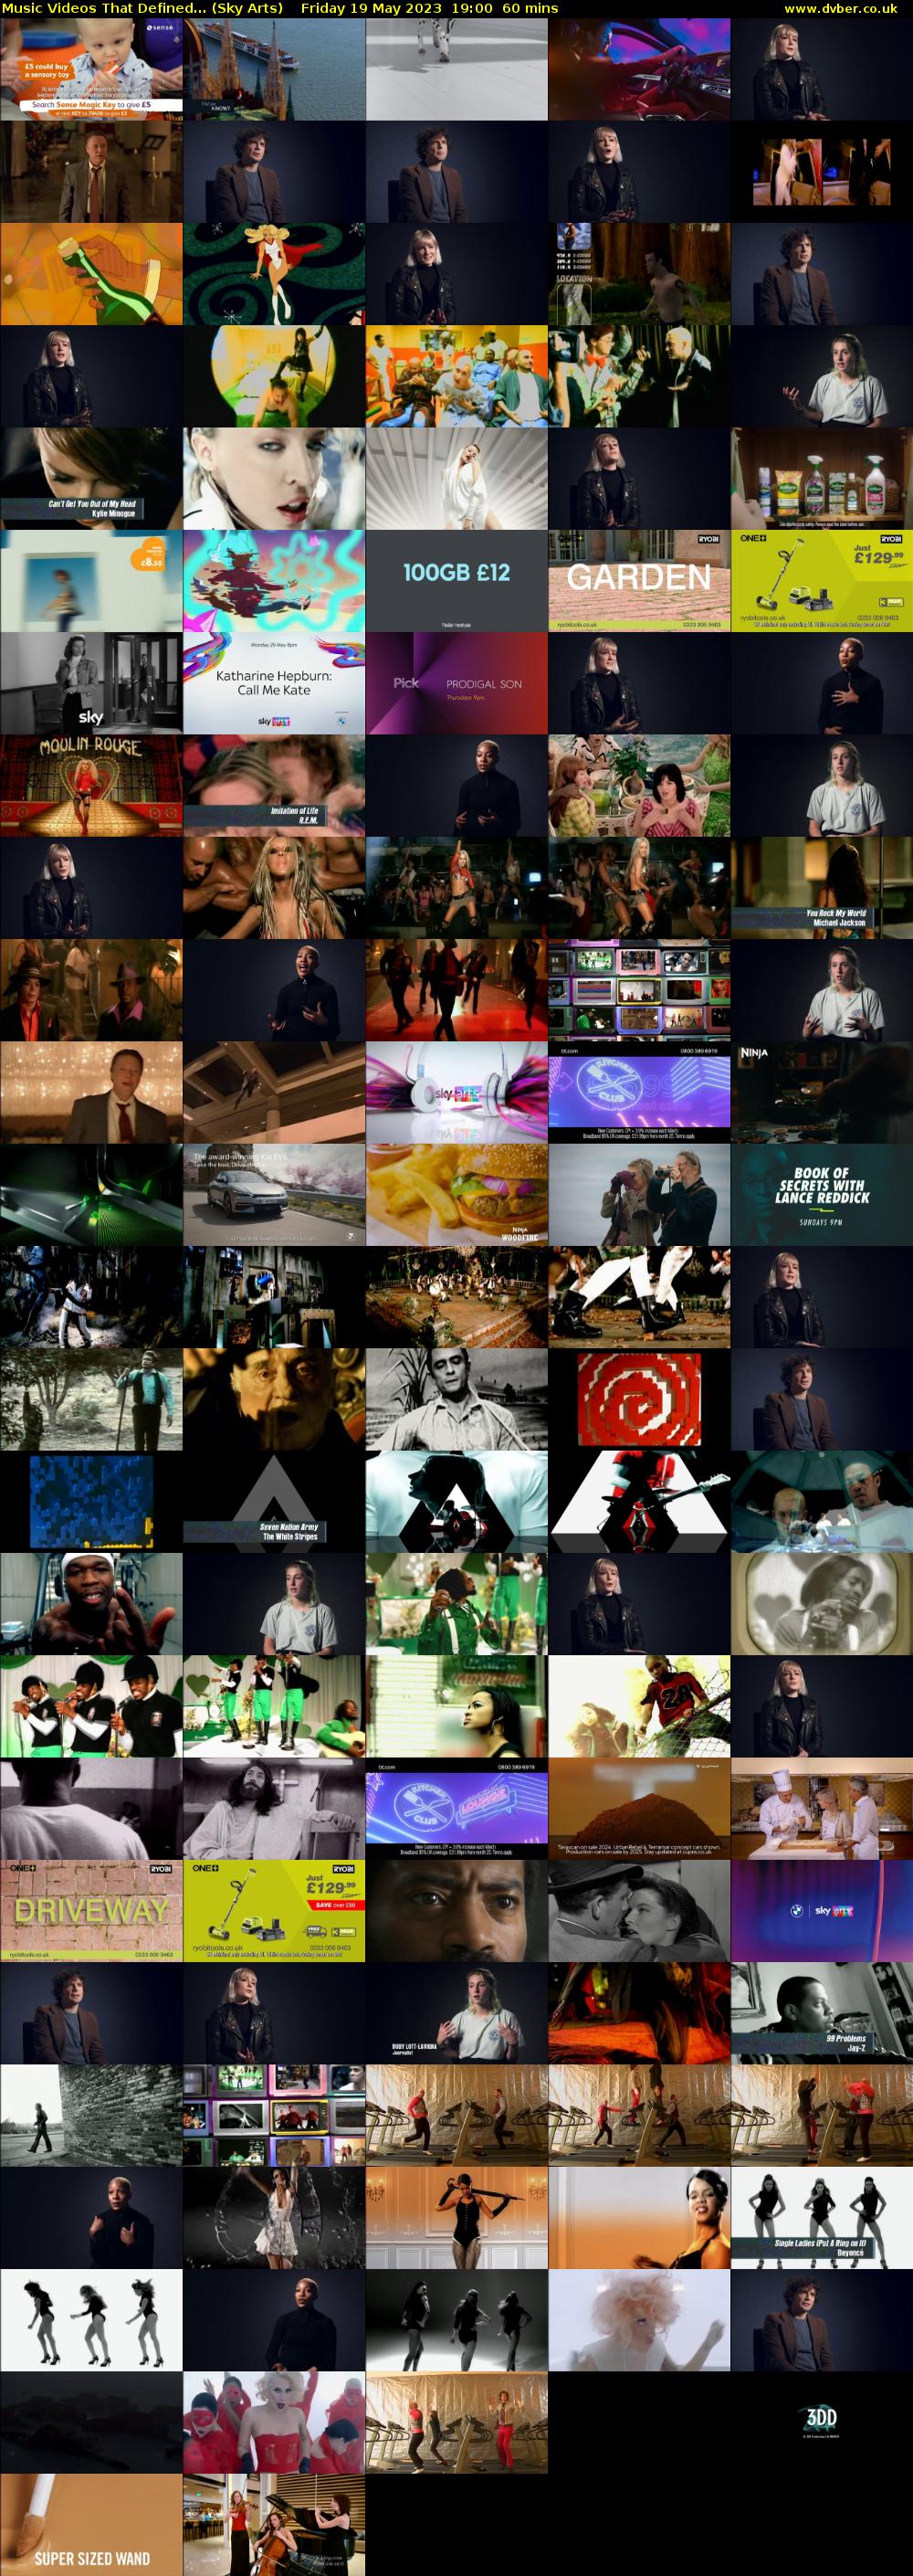 Music Videos That Defined... (Sky Arts) Friday 19 May 2023 19:00 - 20:00